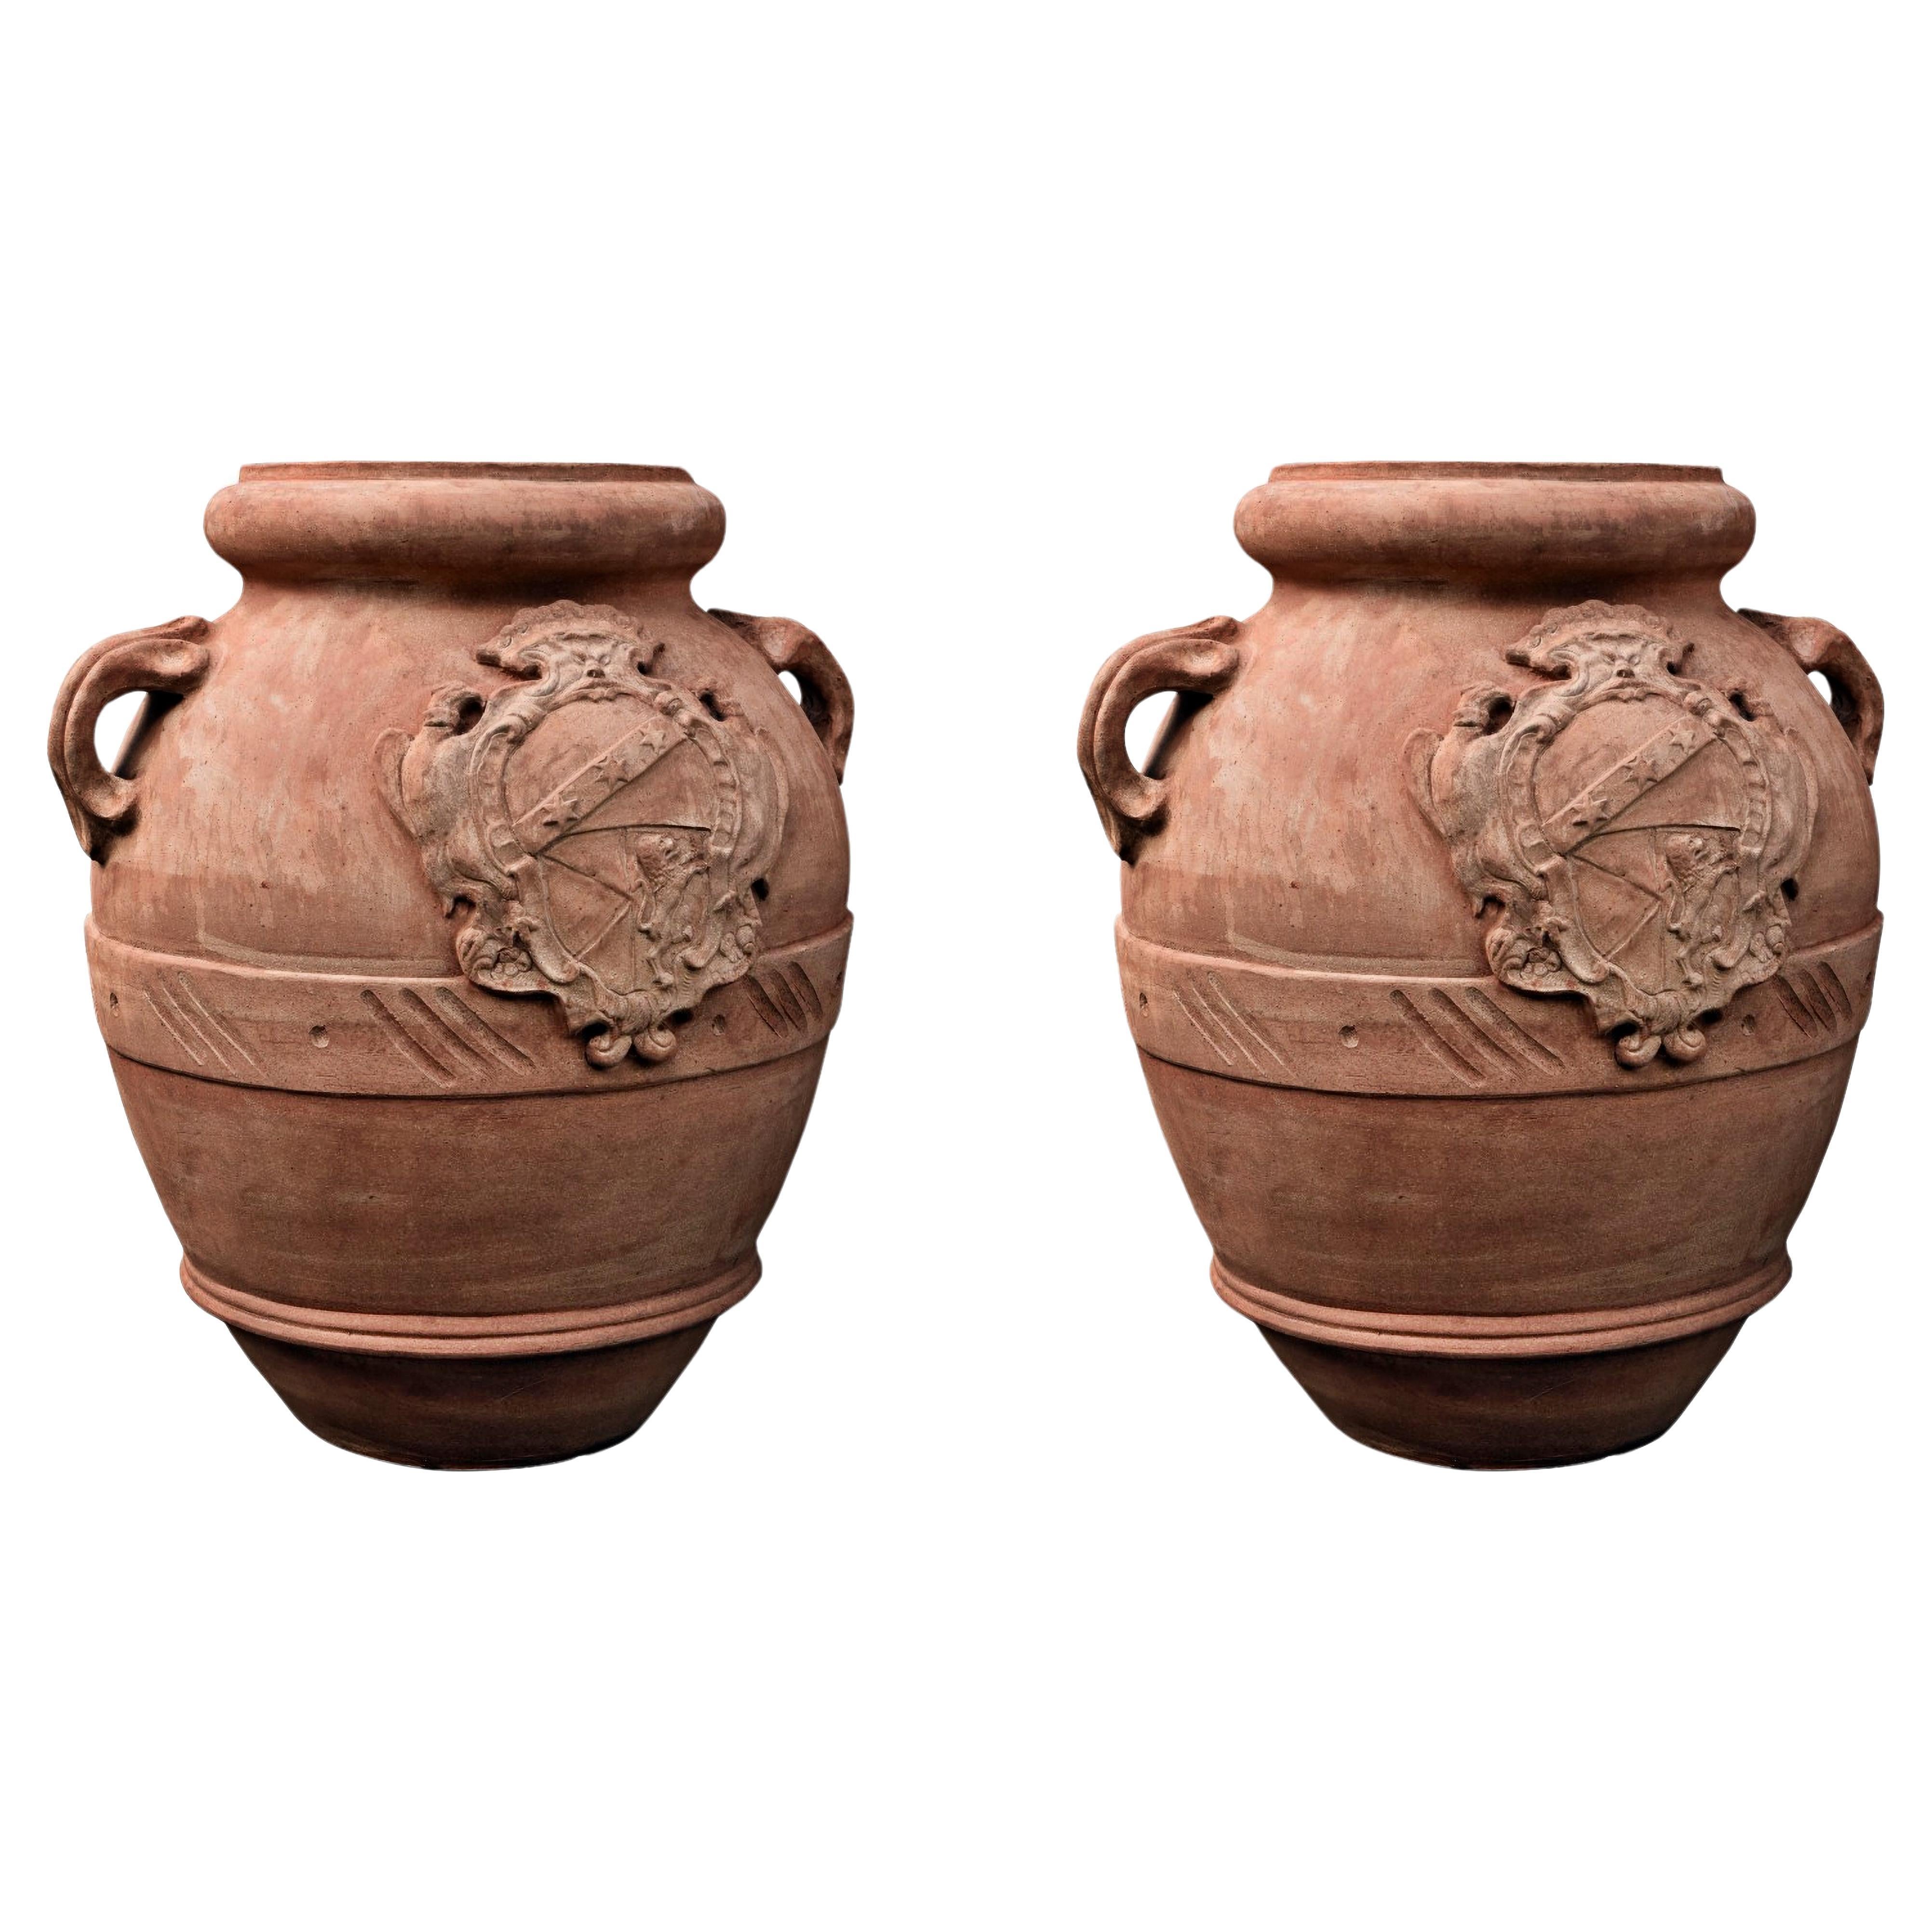 PAIR OF TUSCAN OIL JARS H.70CM WITH GINORI COAT OF ARMS TERRACOTTA 20th Century For Sale